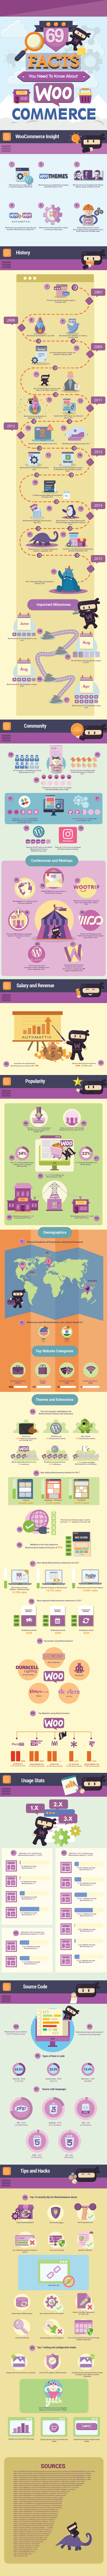 WooCommerce Stats Infographic